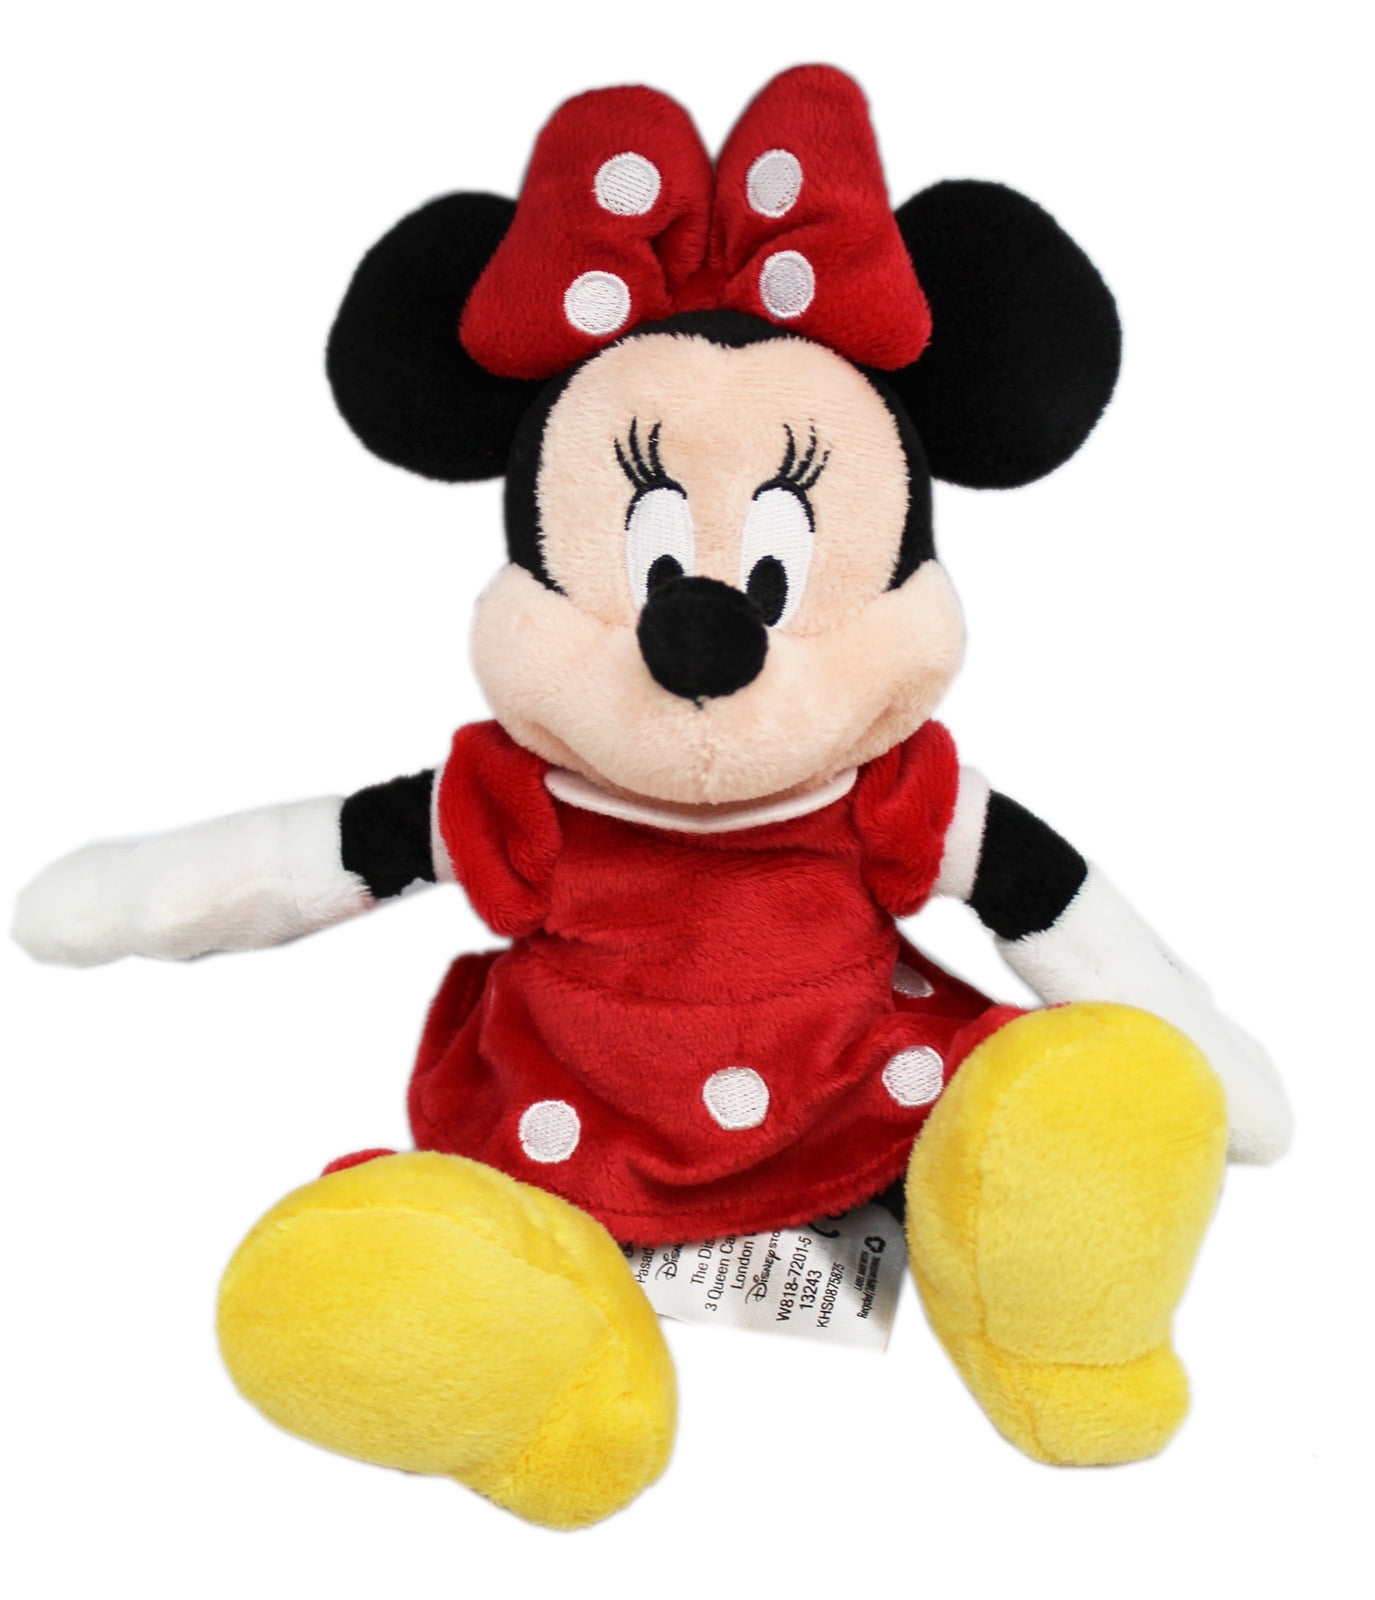 Details about   DISNEY Plush Minnie Mouse 15" Pink & Red Polka Dot Dress & Bow Stuffed Animal 2 